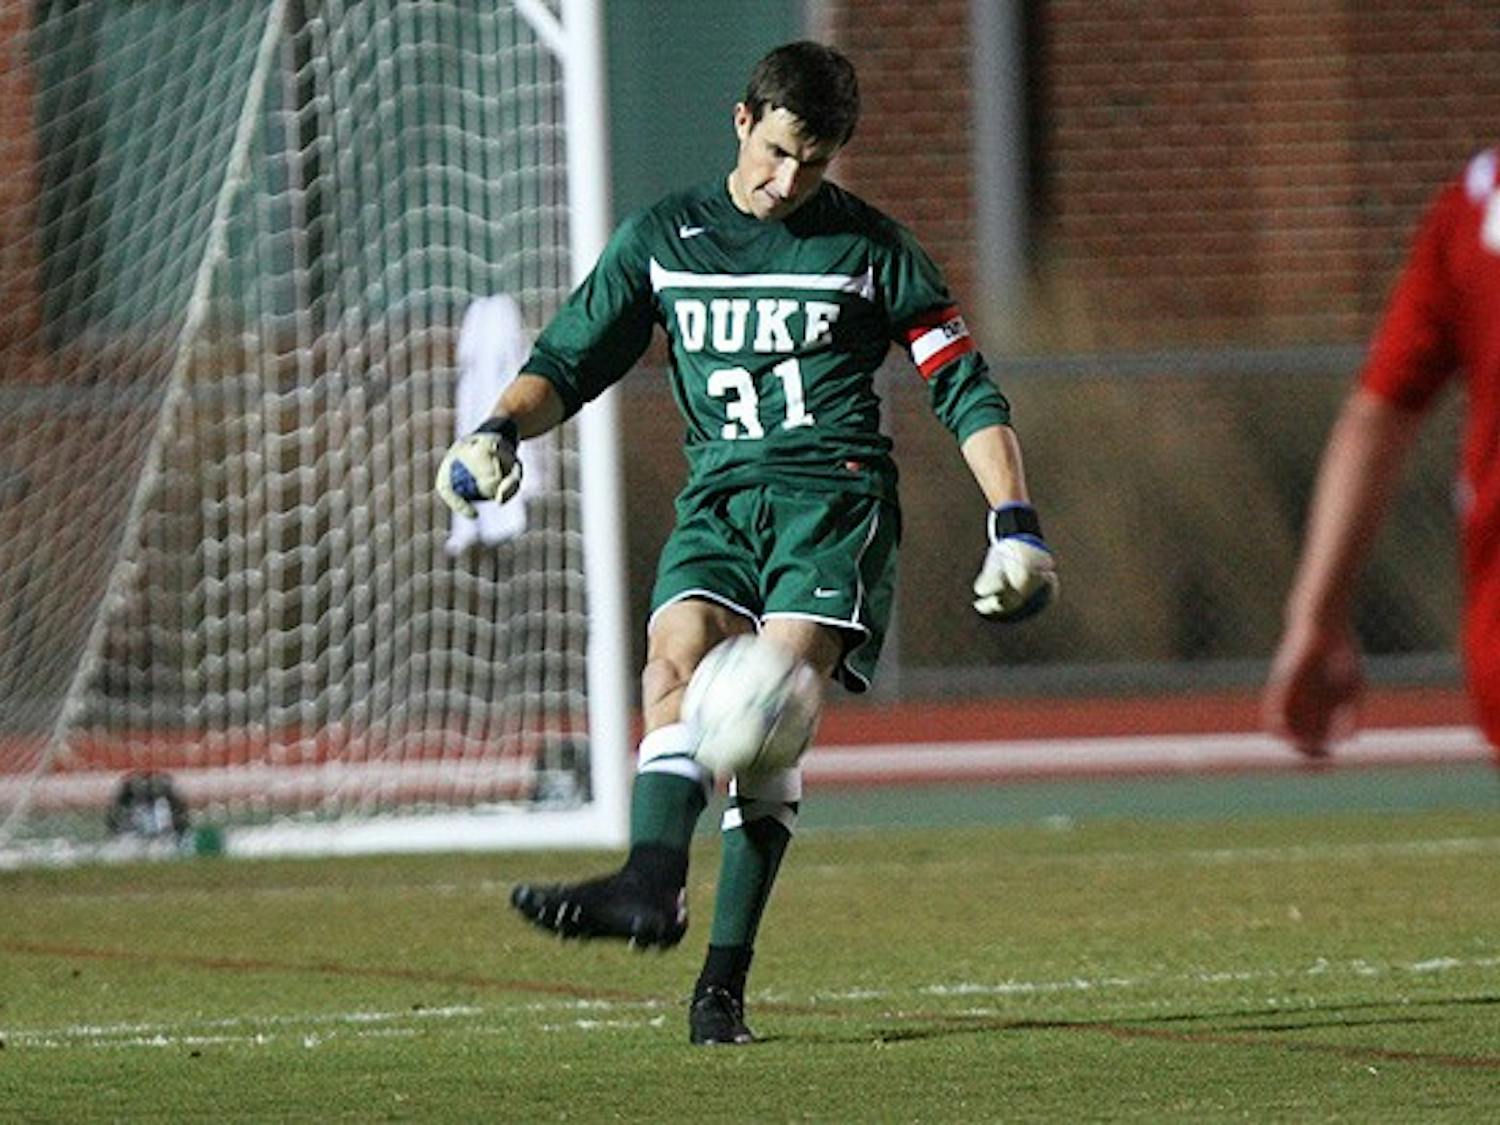 Goalkeeper James Belshaw is the lone senior on this year’s Duke squad, that will need its veteran defensive unit to step up against Notre Dame.